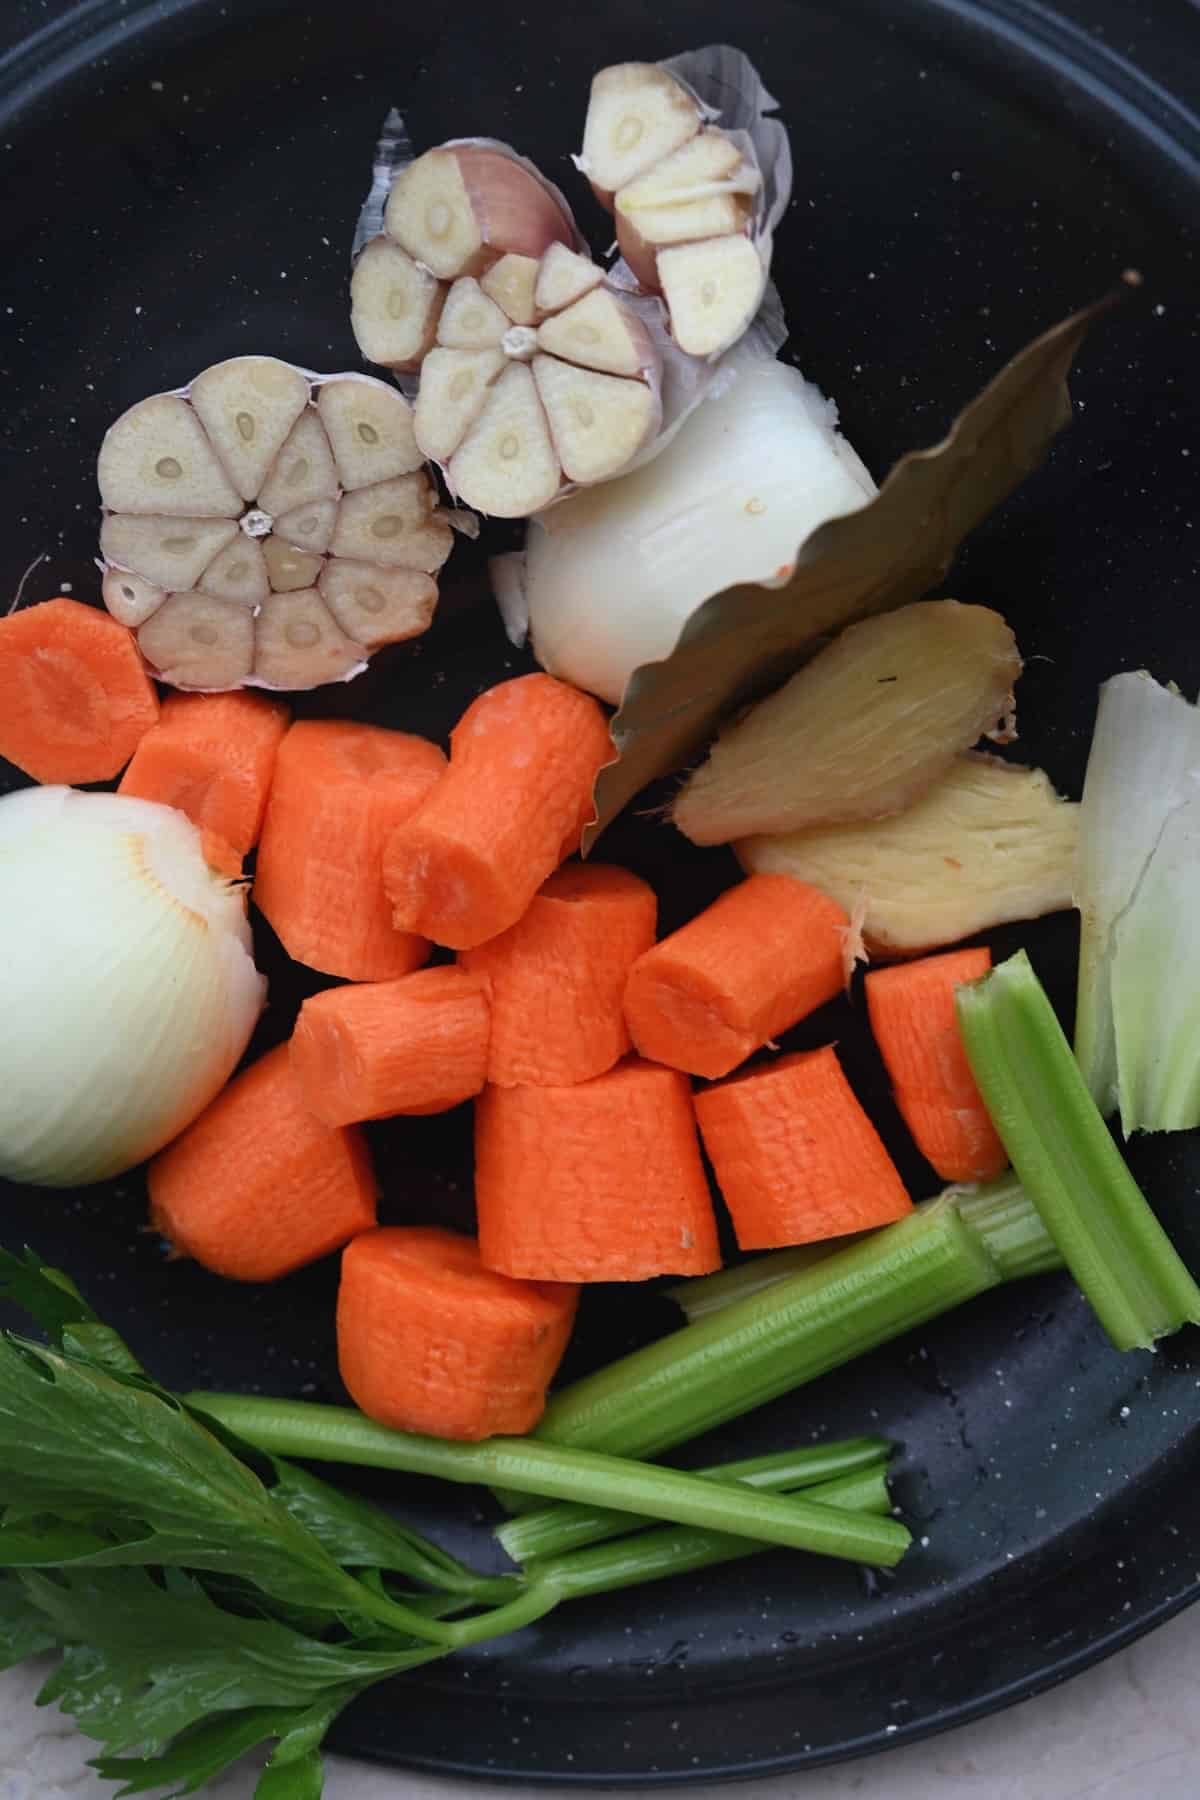 Chopped vegetables to add to bone broth